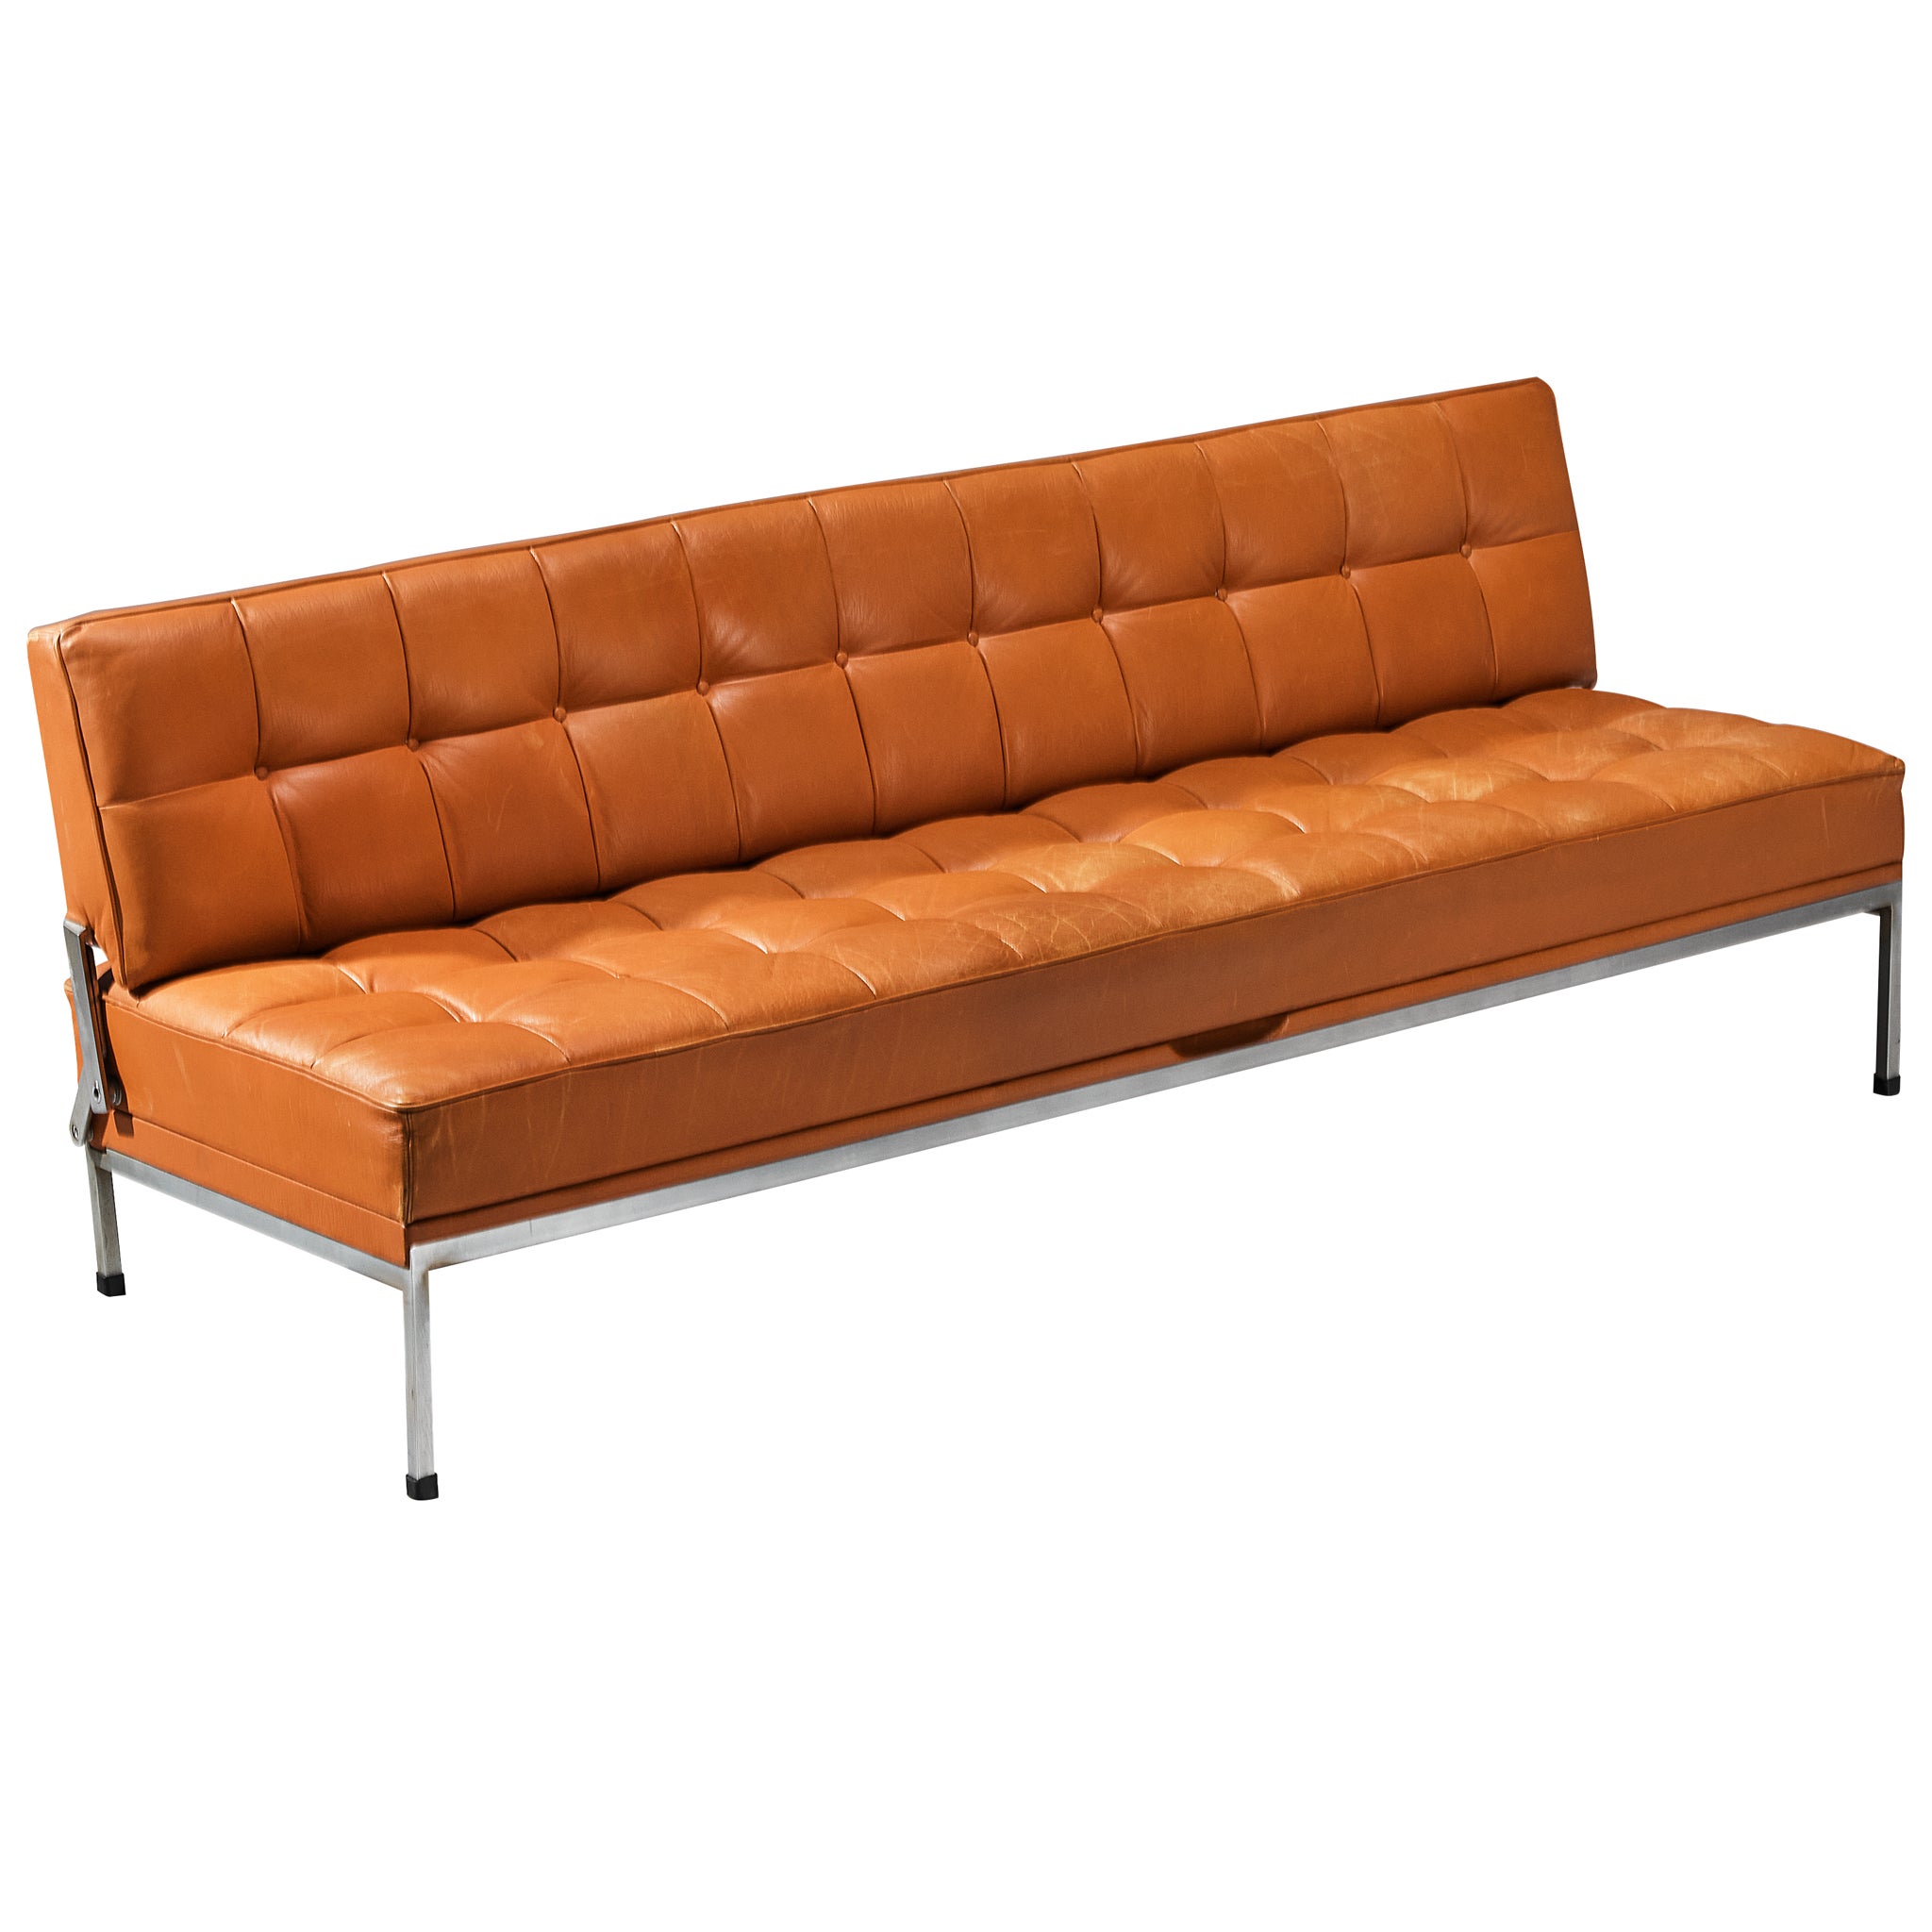 Johannes Spalt 'Constanza' Sofa Daybed in Leather 